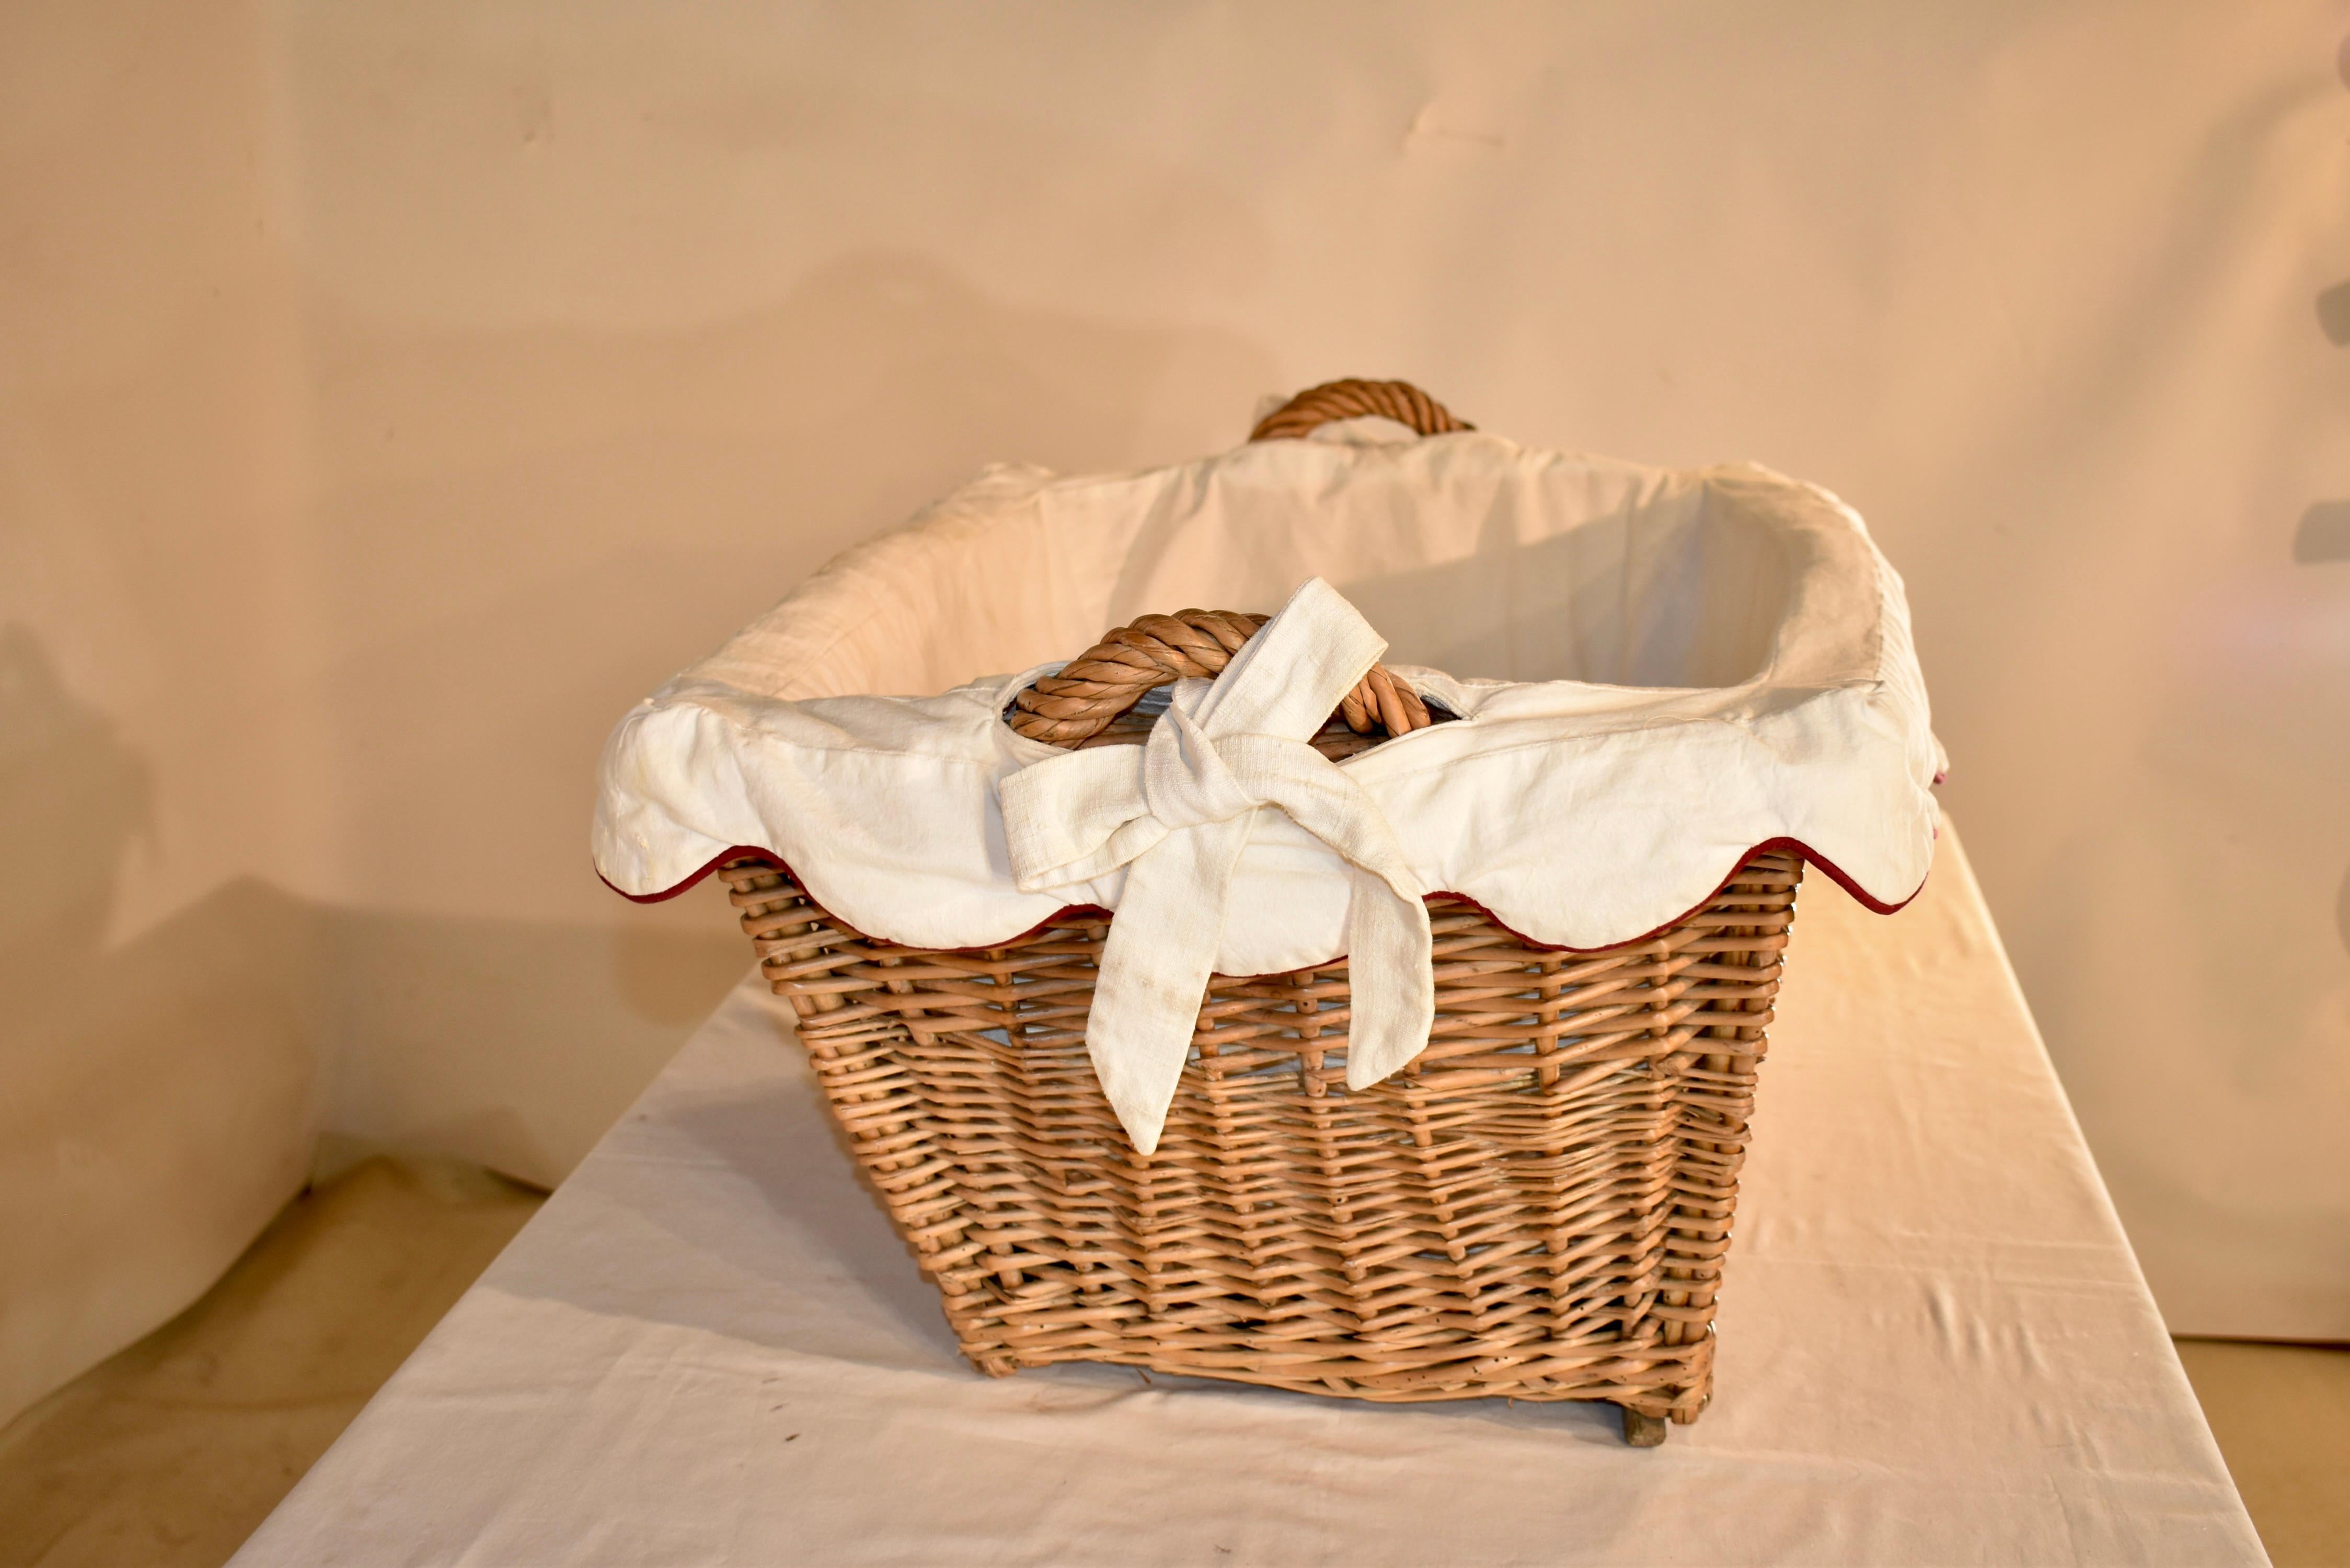 Circa 1920 French Laundry Basket For Sale 2